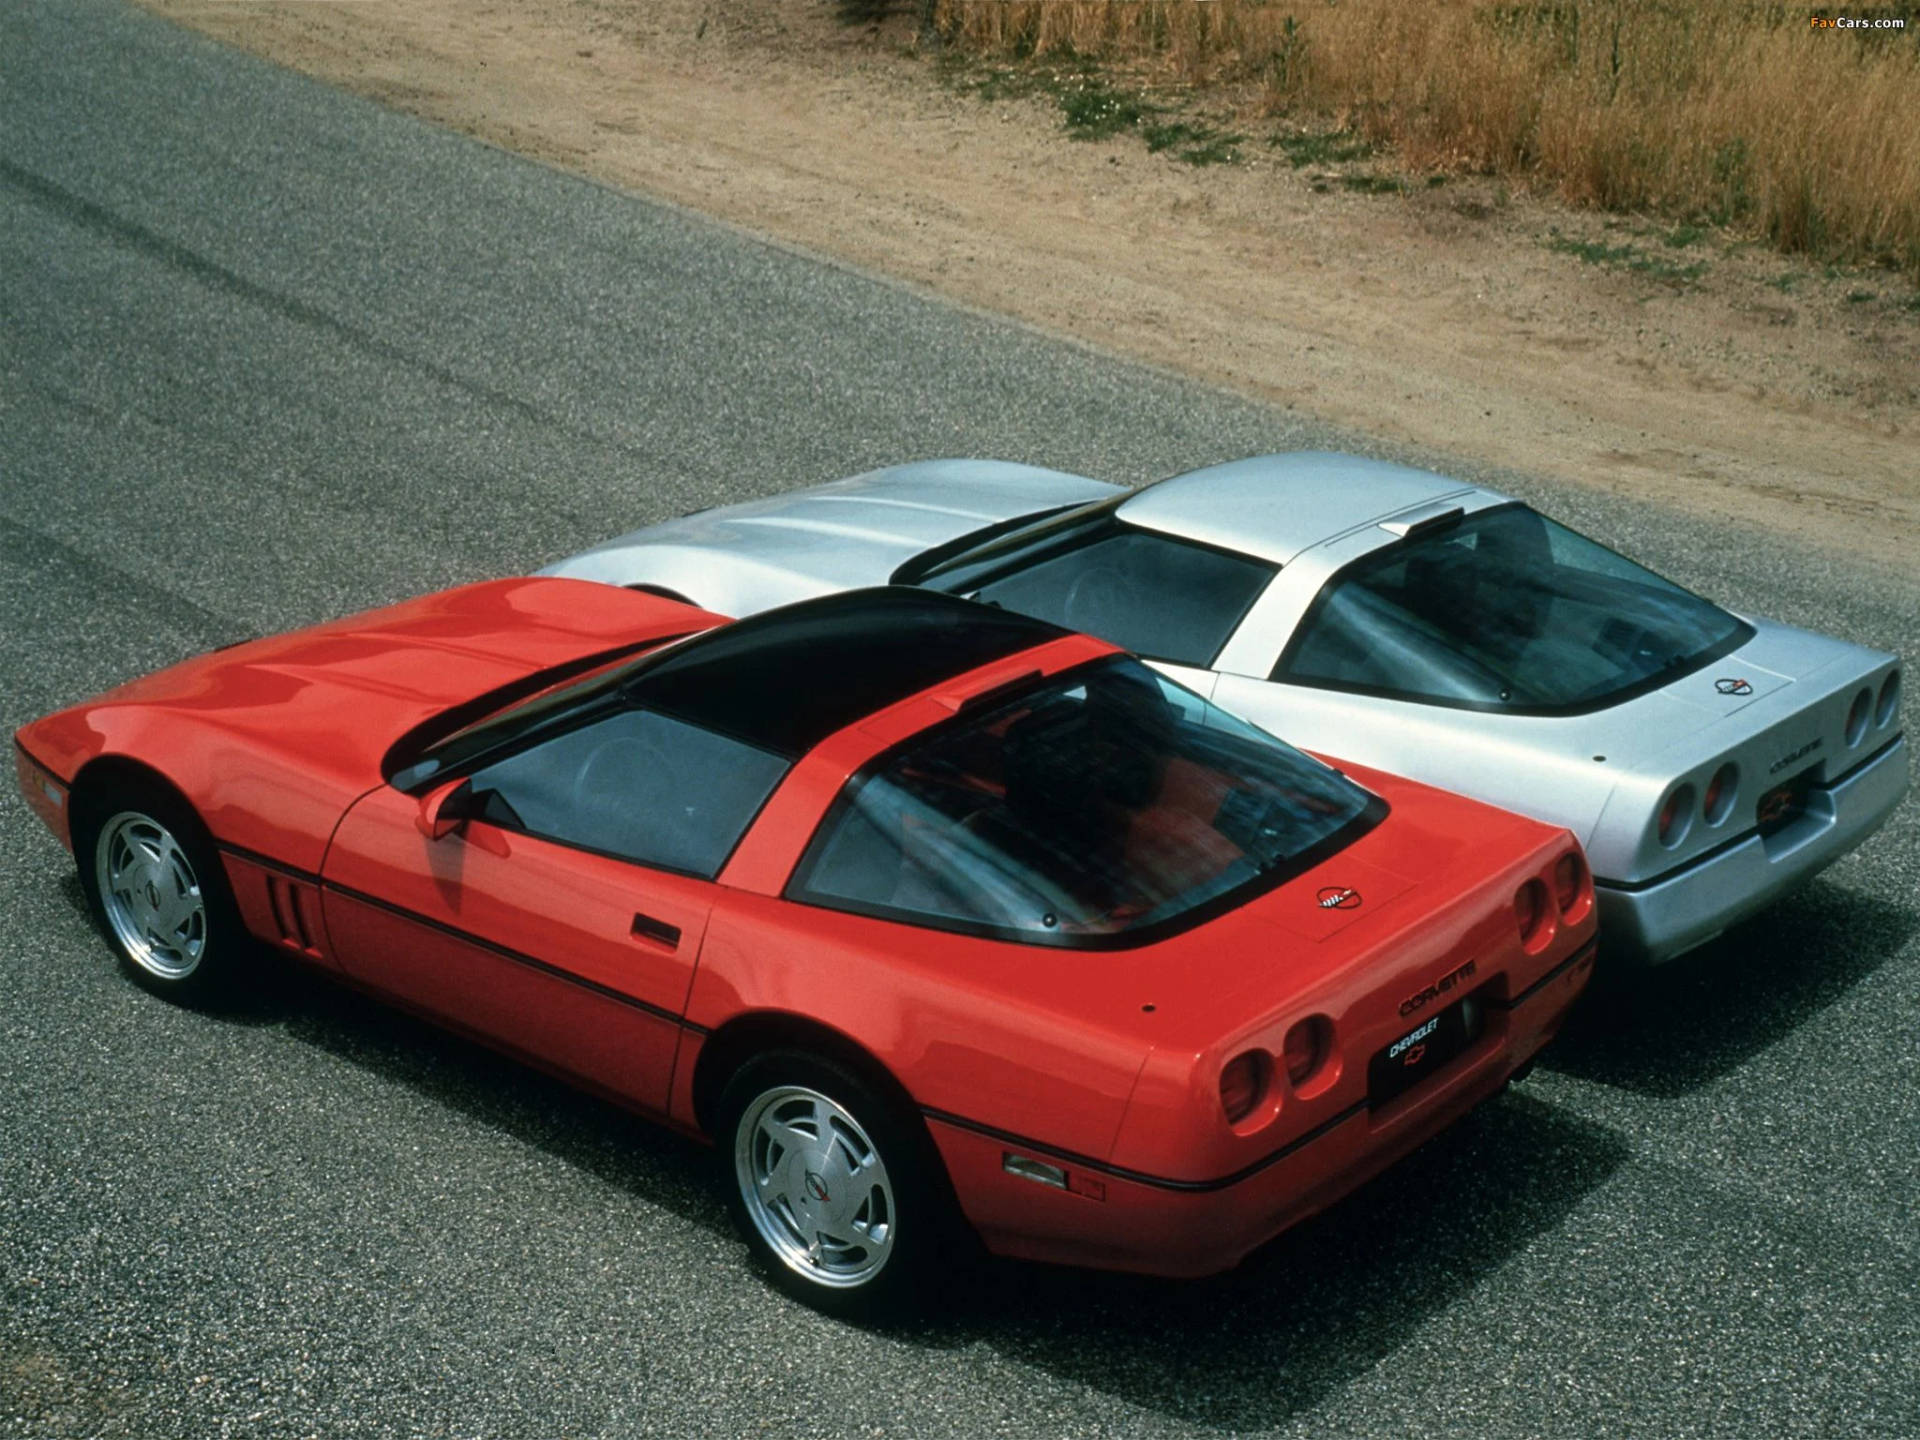 Two C4 Corvettes On The Road